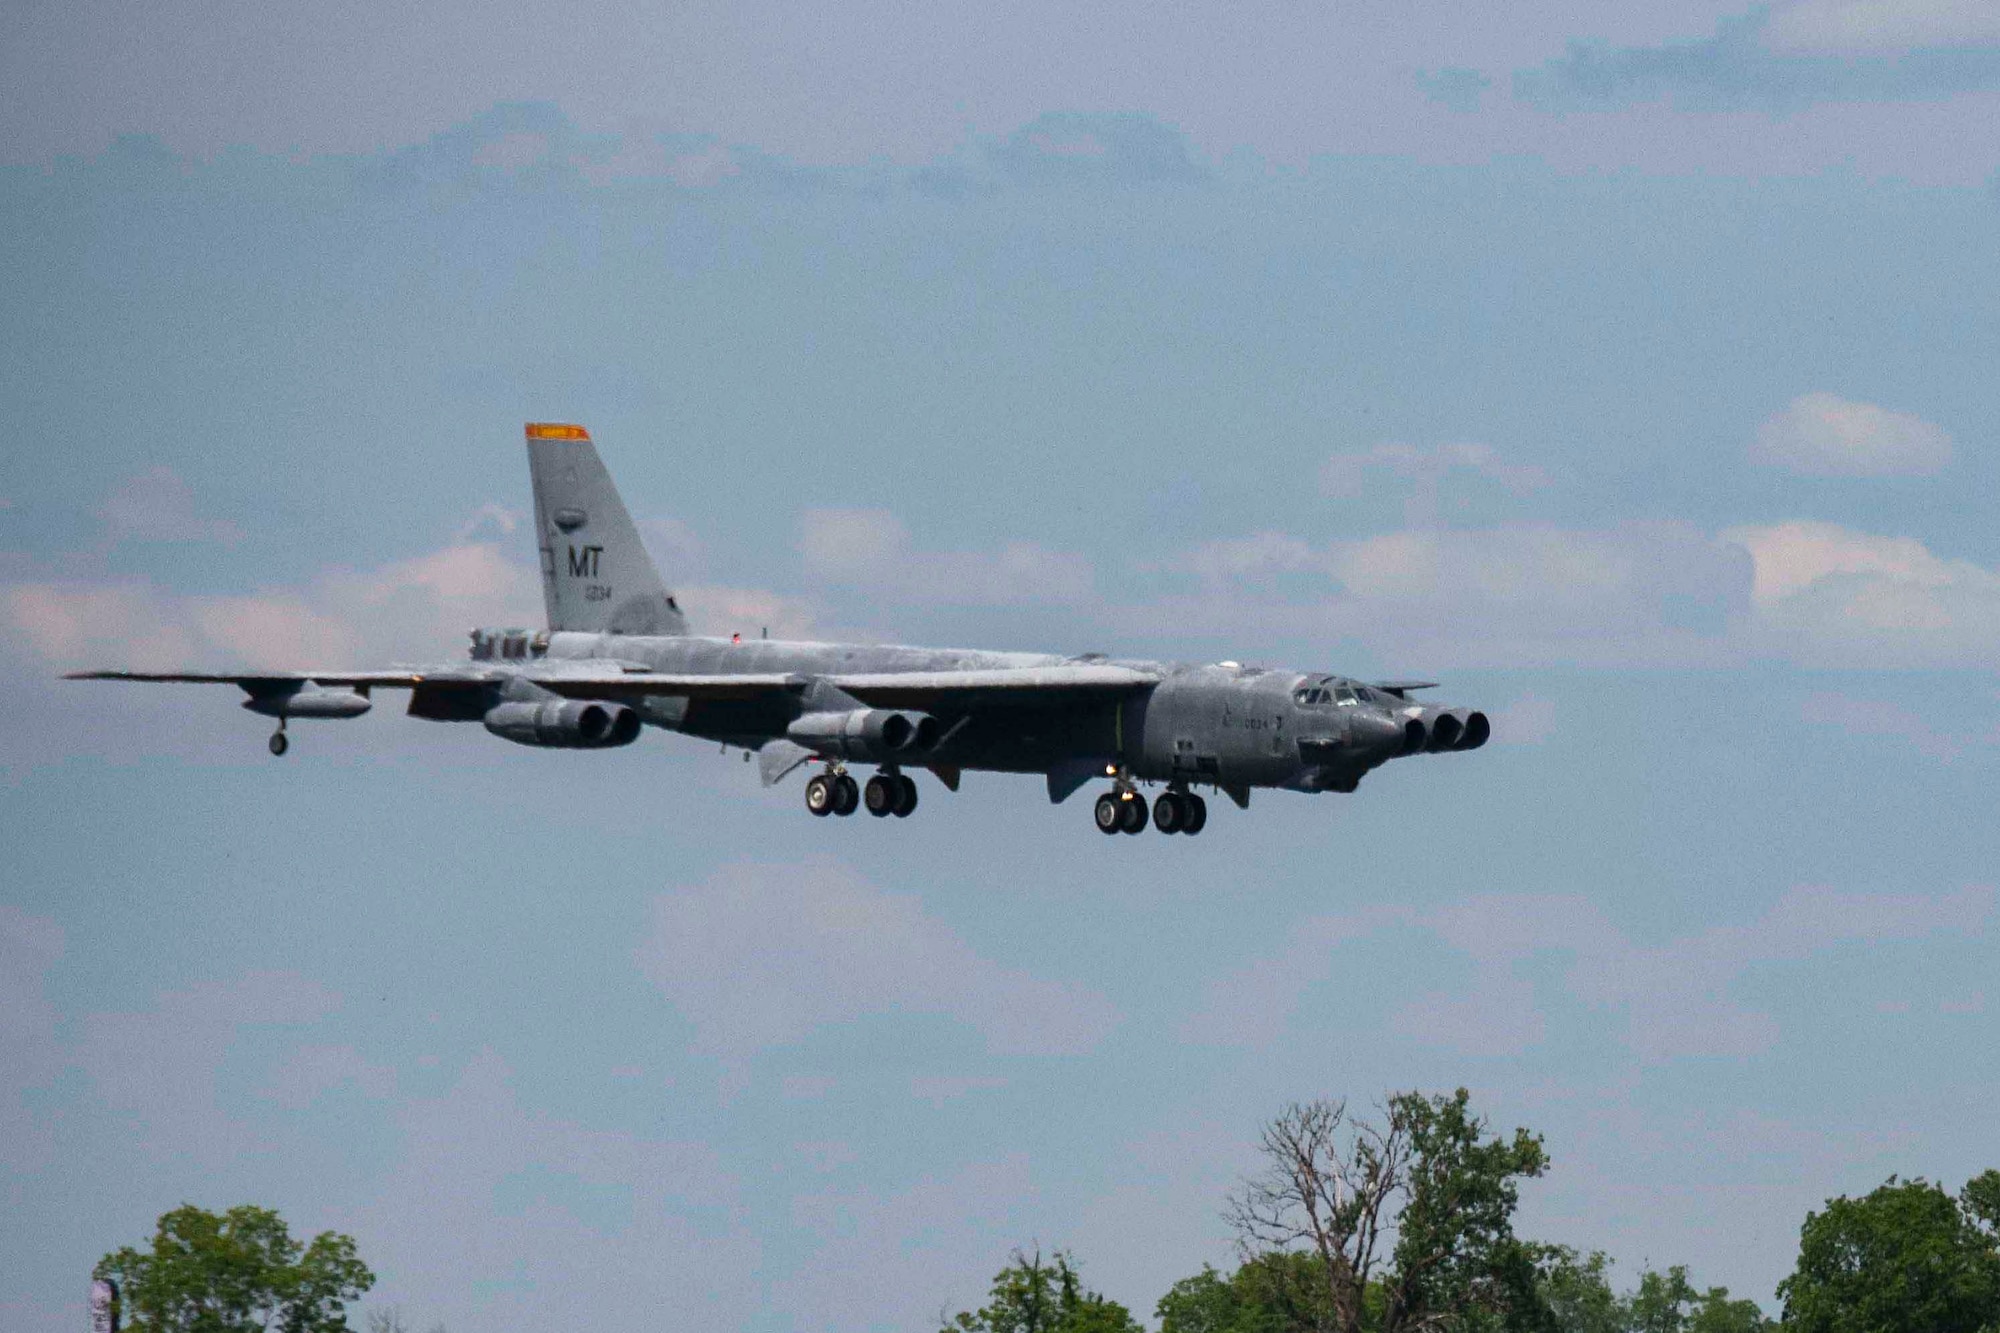 A B-52 Stratofortress, nicknamed "Wise Guy," makes its final approach to Barksdale Air Force Base, Louisiana, May 14, 2019.  The bomber was flown out of the 309th Aerospace Maintenance and Regeneration Group, also known as the "Boneyard", where it had been since 2008.  (U.S. Air Force photo by Master Sgt. Ted Daigle)